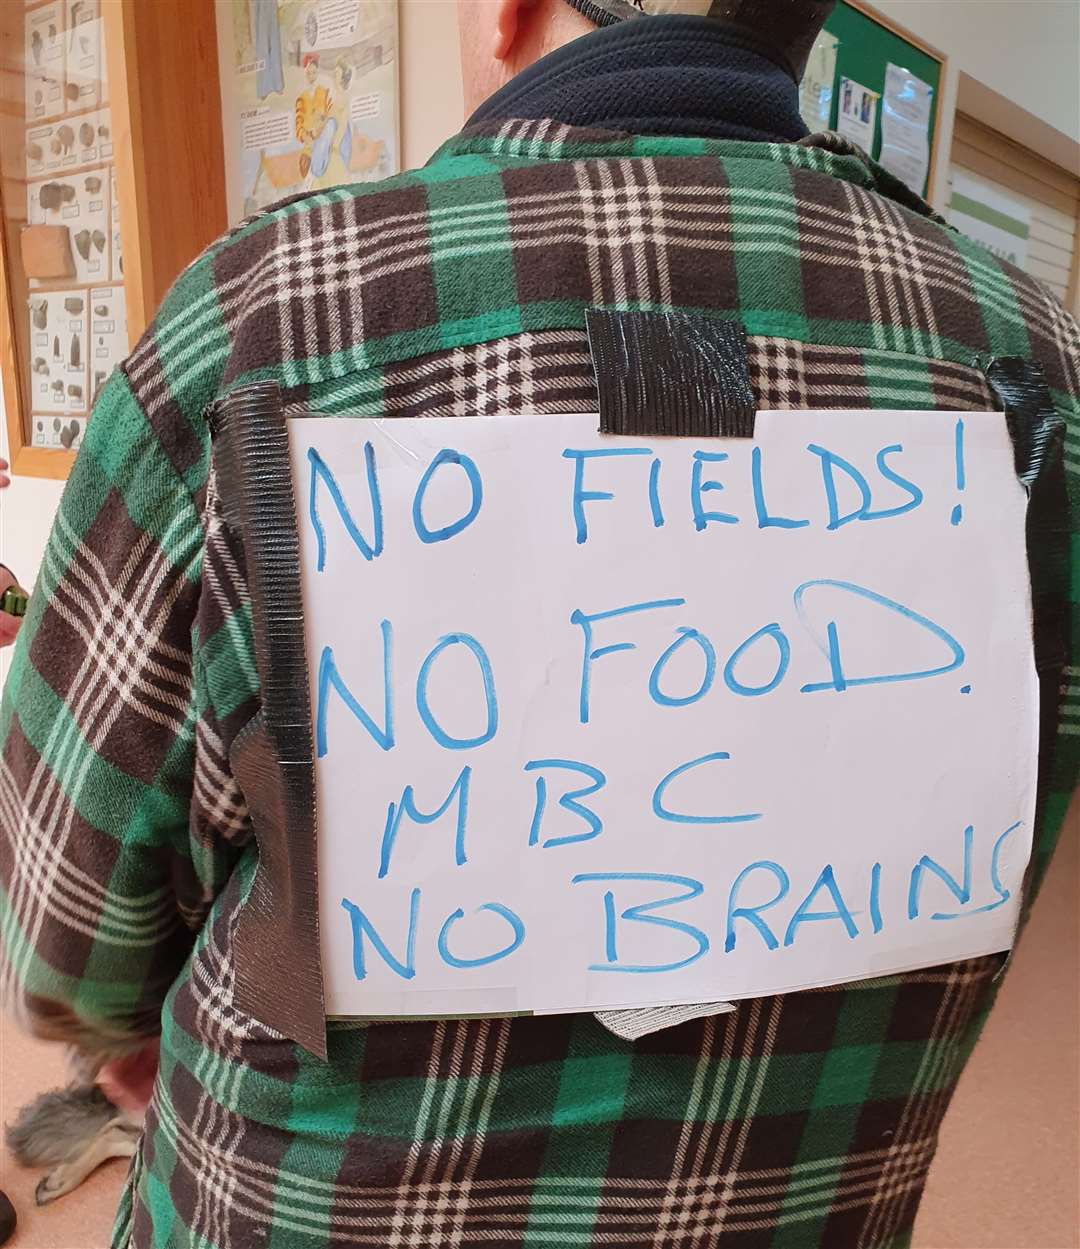 This protester's message was clear - but it was really the Government's fault not MBC's